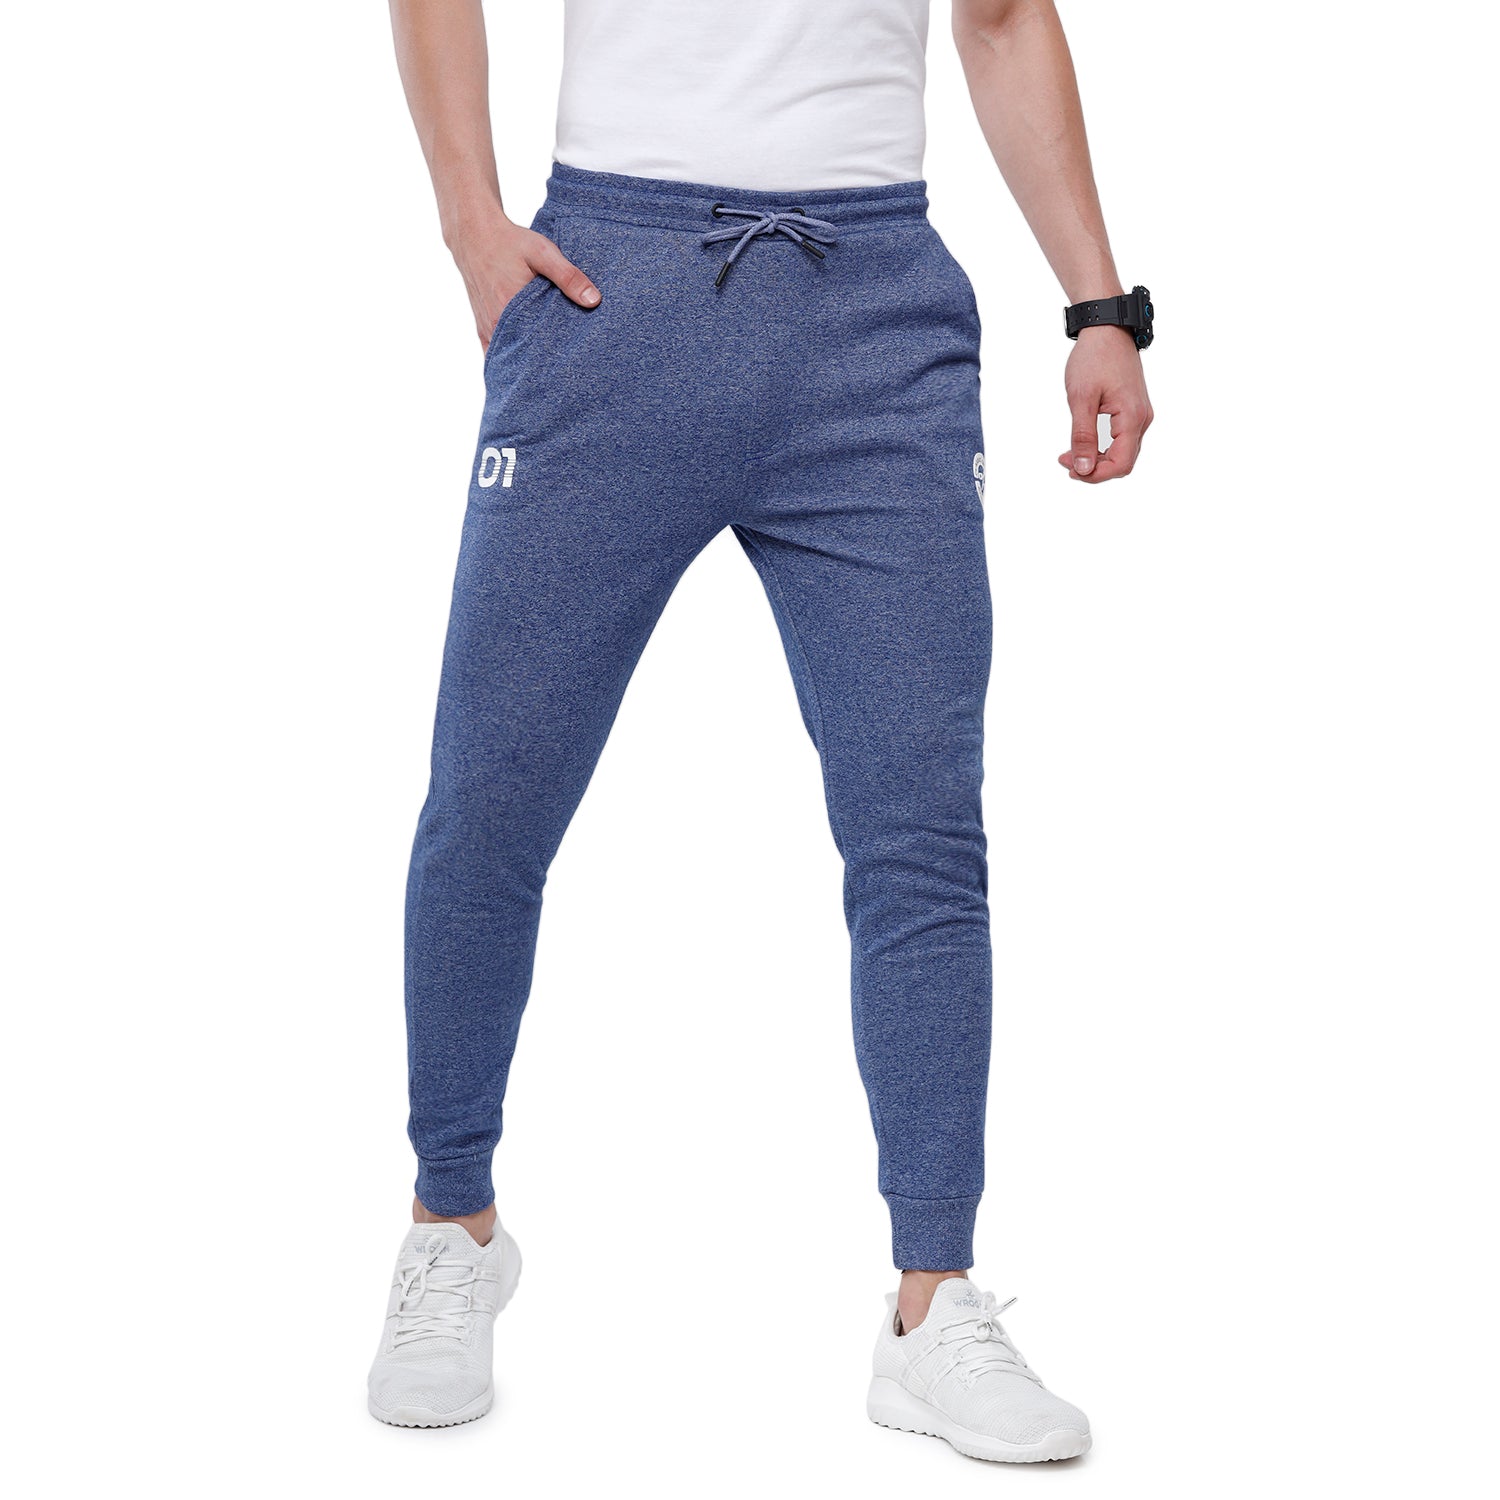 Classic Polo Men's Blue Solid Mélange Slim Fit Sport Jogger Pant - Gioz-04  A - Classic Polo